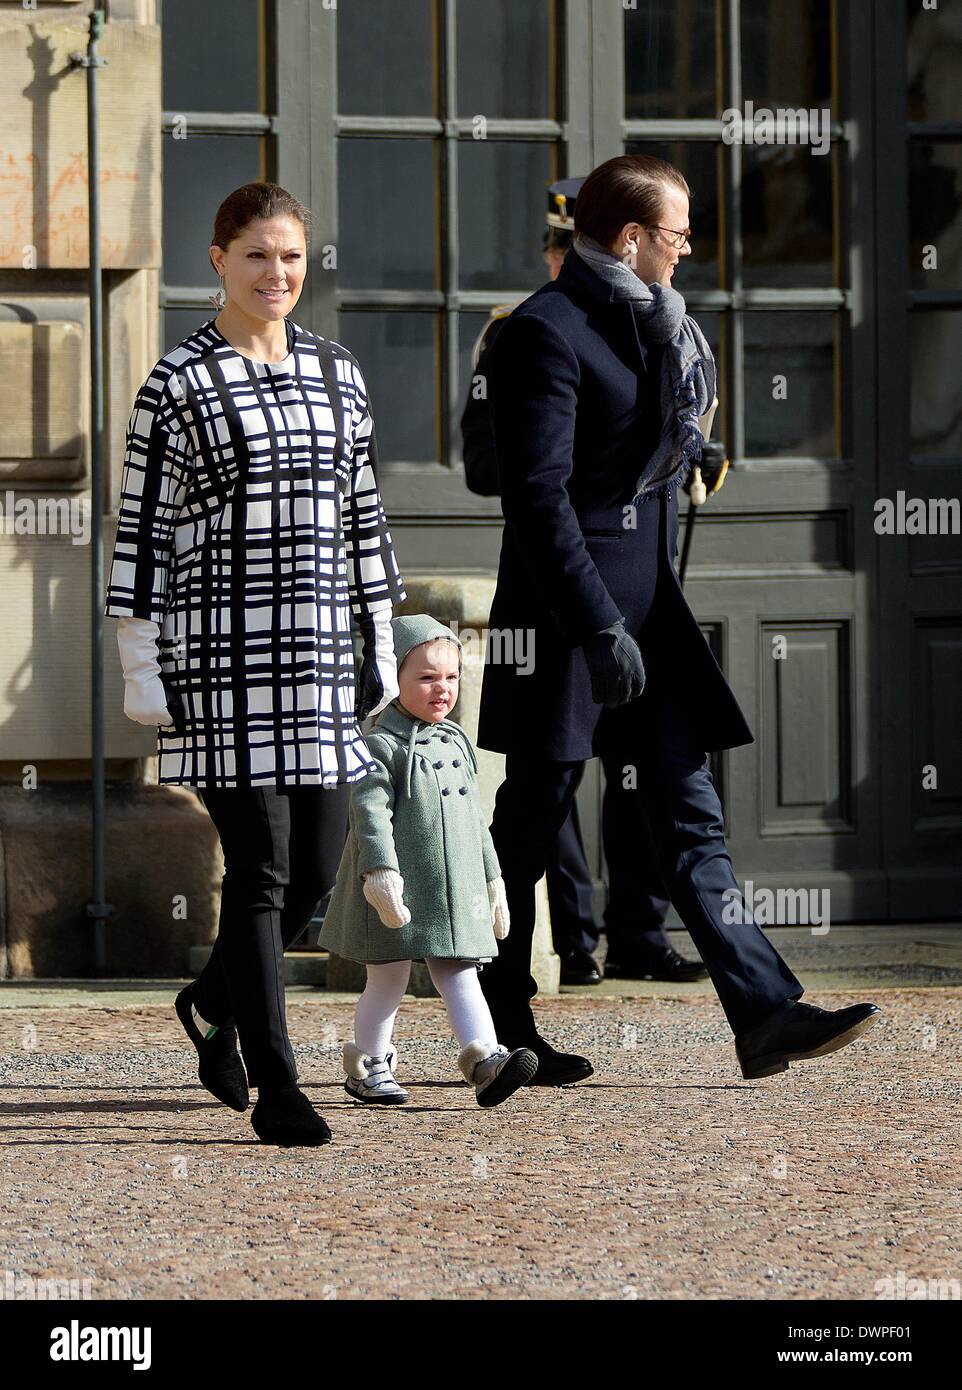 Princess Victoria celebrates her saint's day with Prince Daniel Westling and Princess Estelle at the Royal Palace Square in Stockholm. Photo: RPE/ Albert Nieboer - Stock Photo